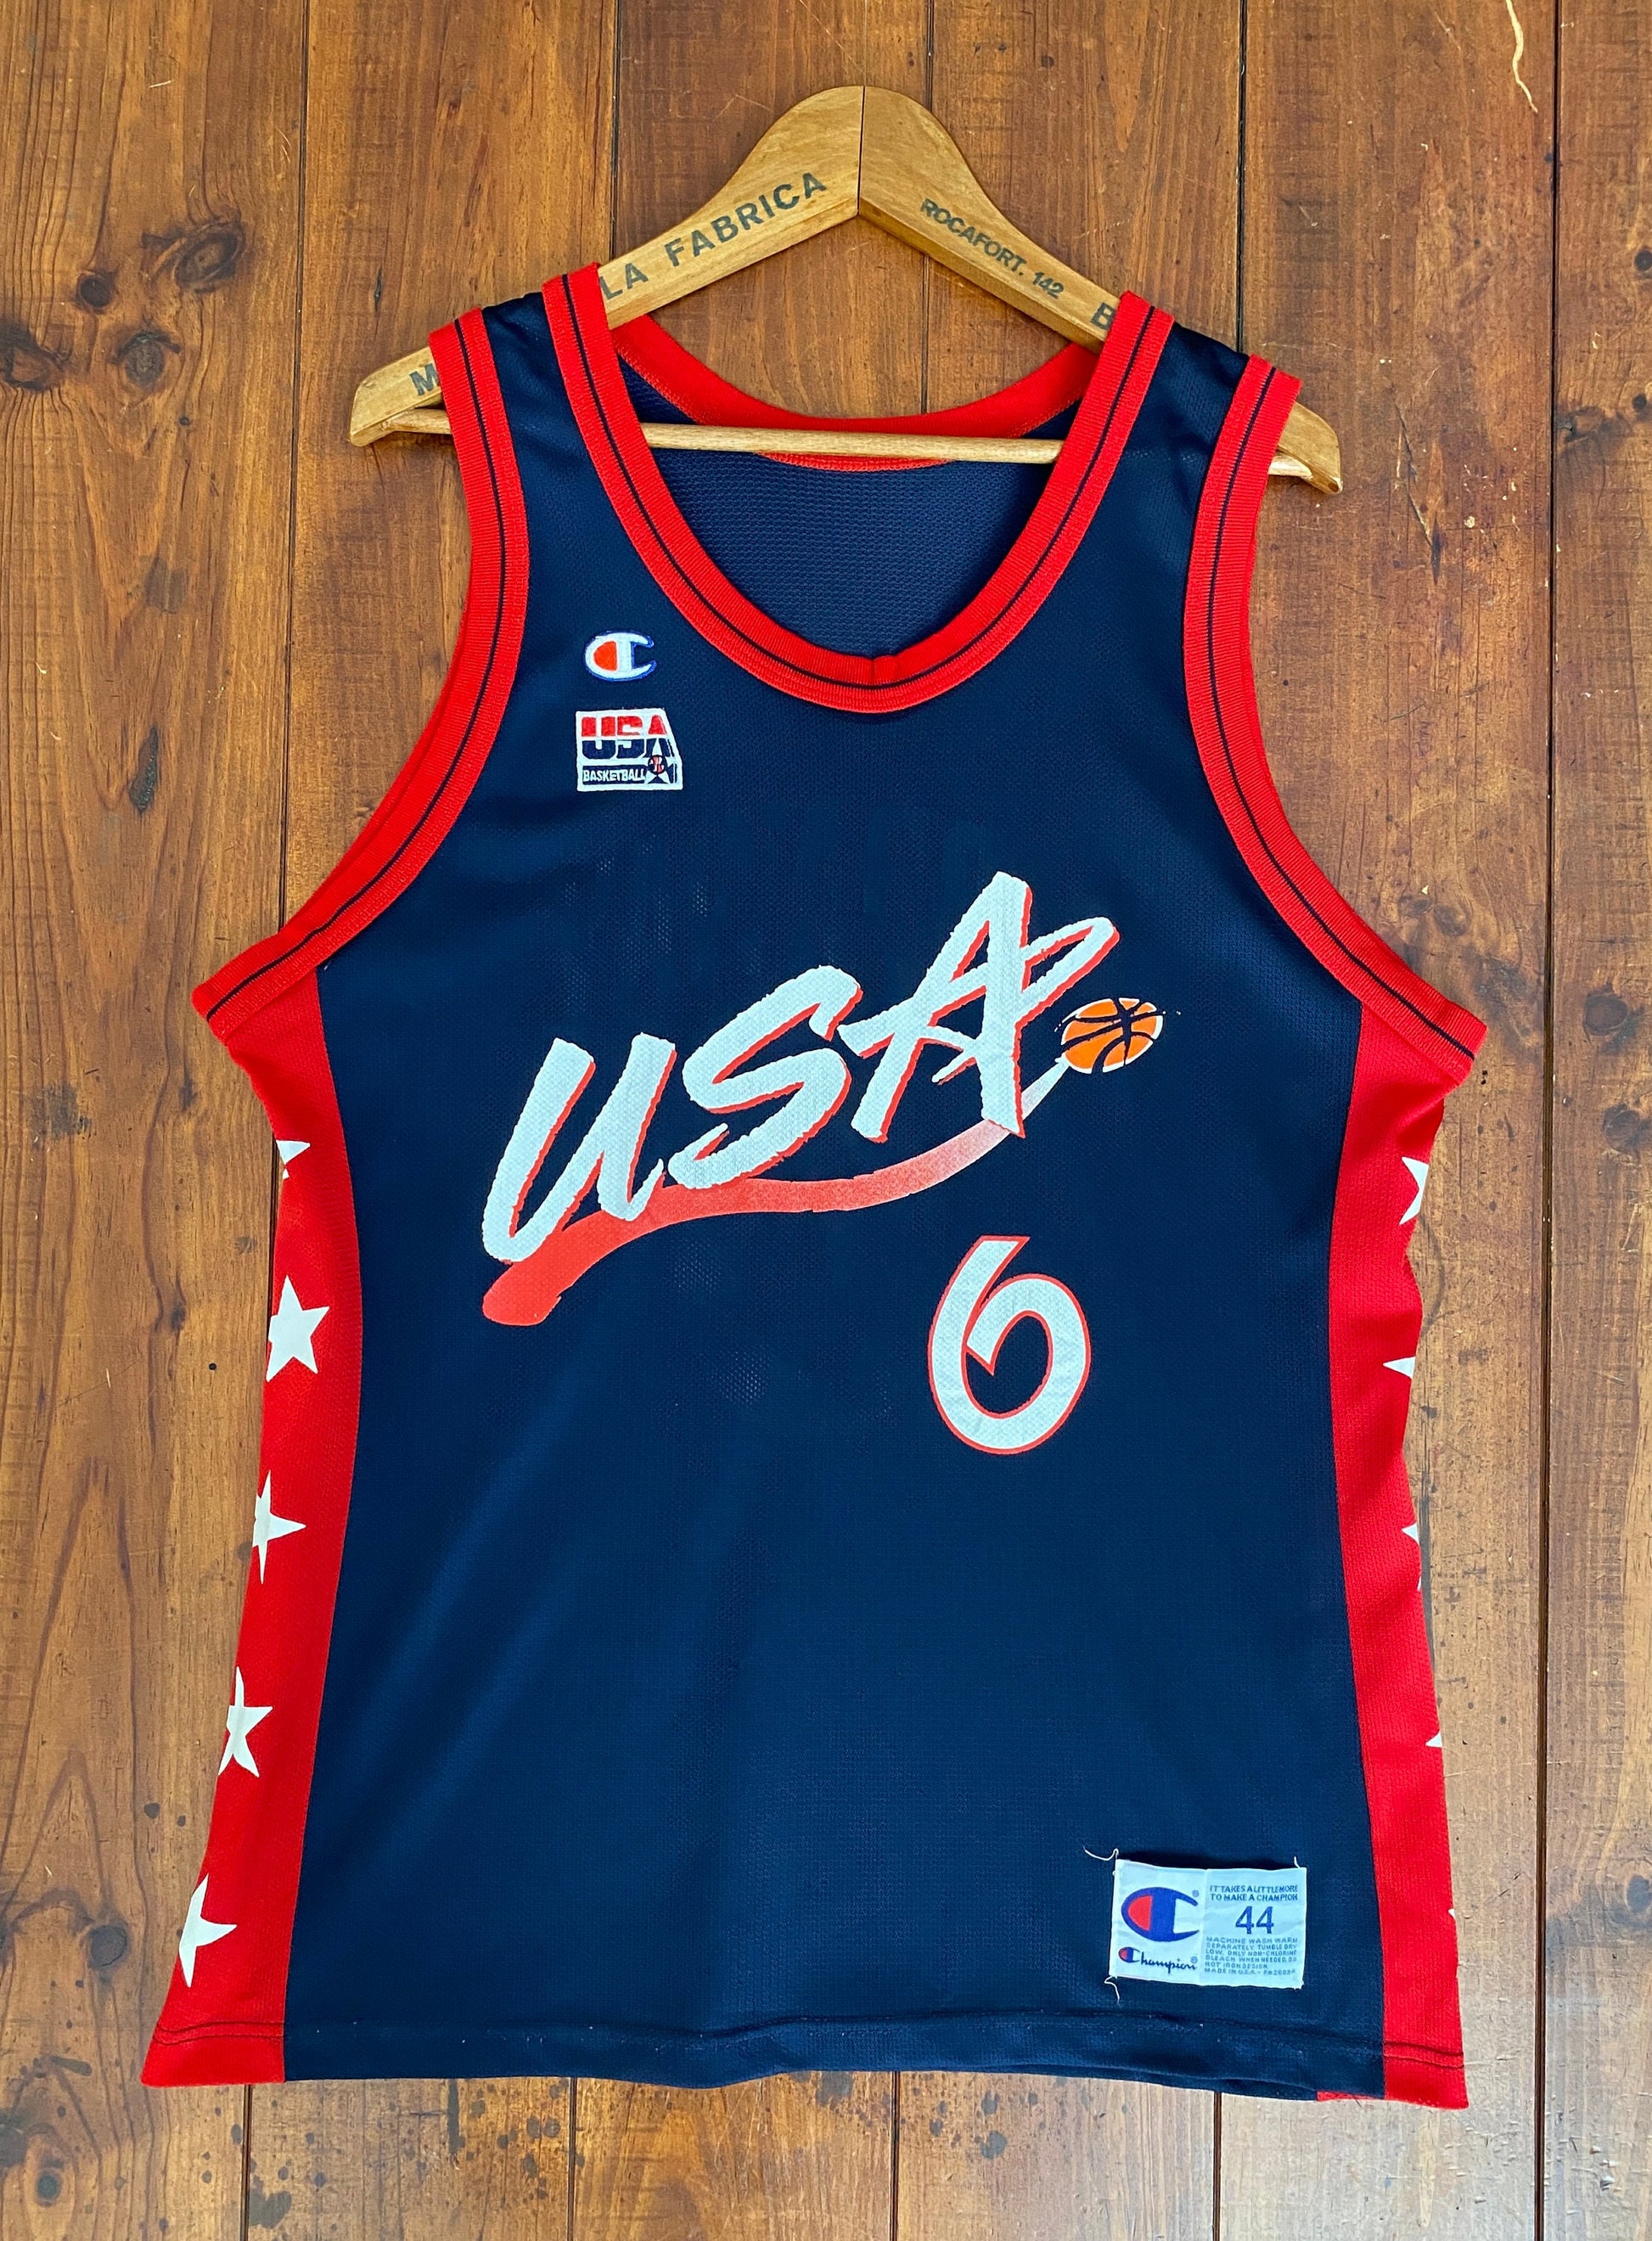 Vintage 90s USA Team Hardaway #6 NBA jersey, size 44 - front view. Proudly made in USA by Champion.